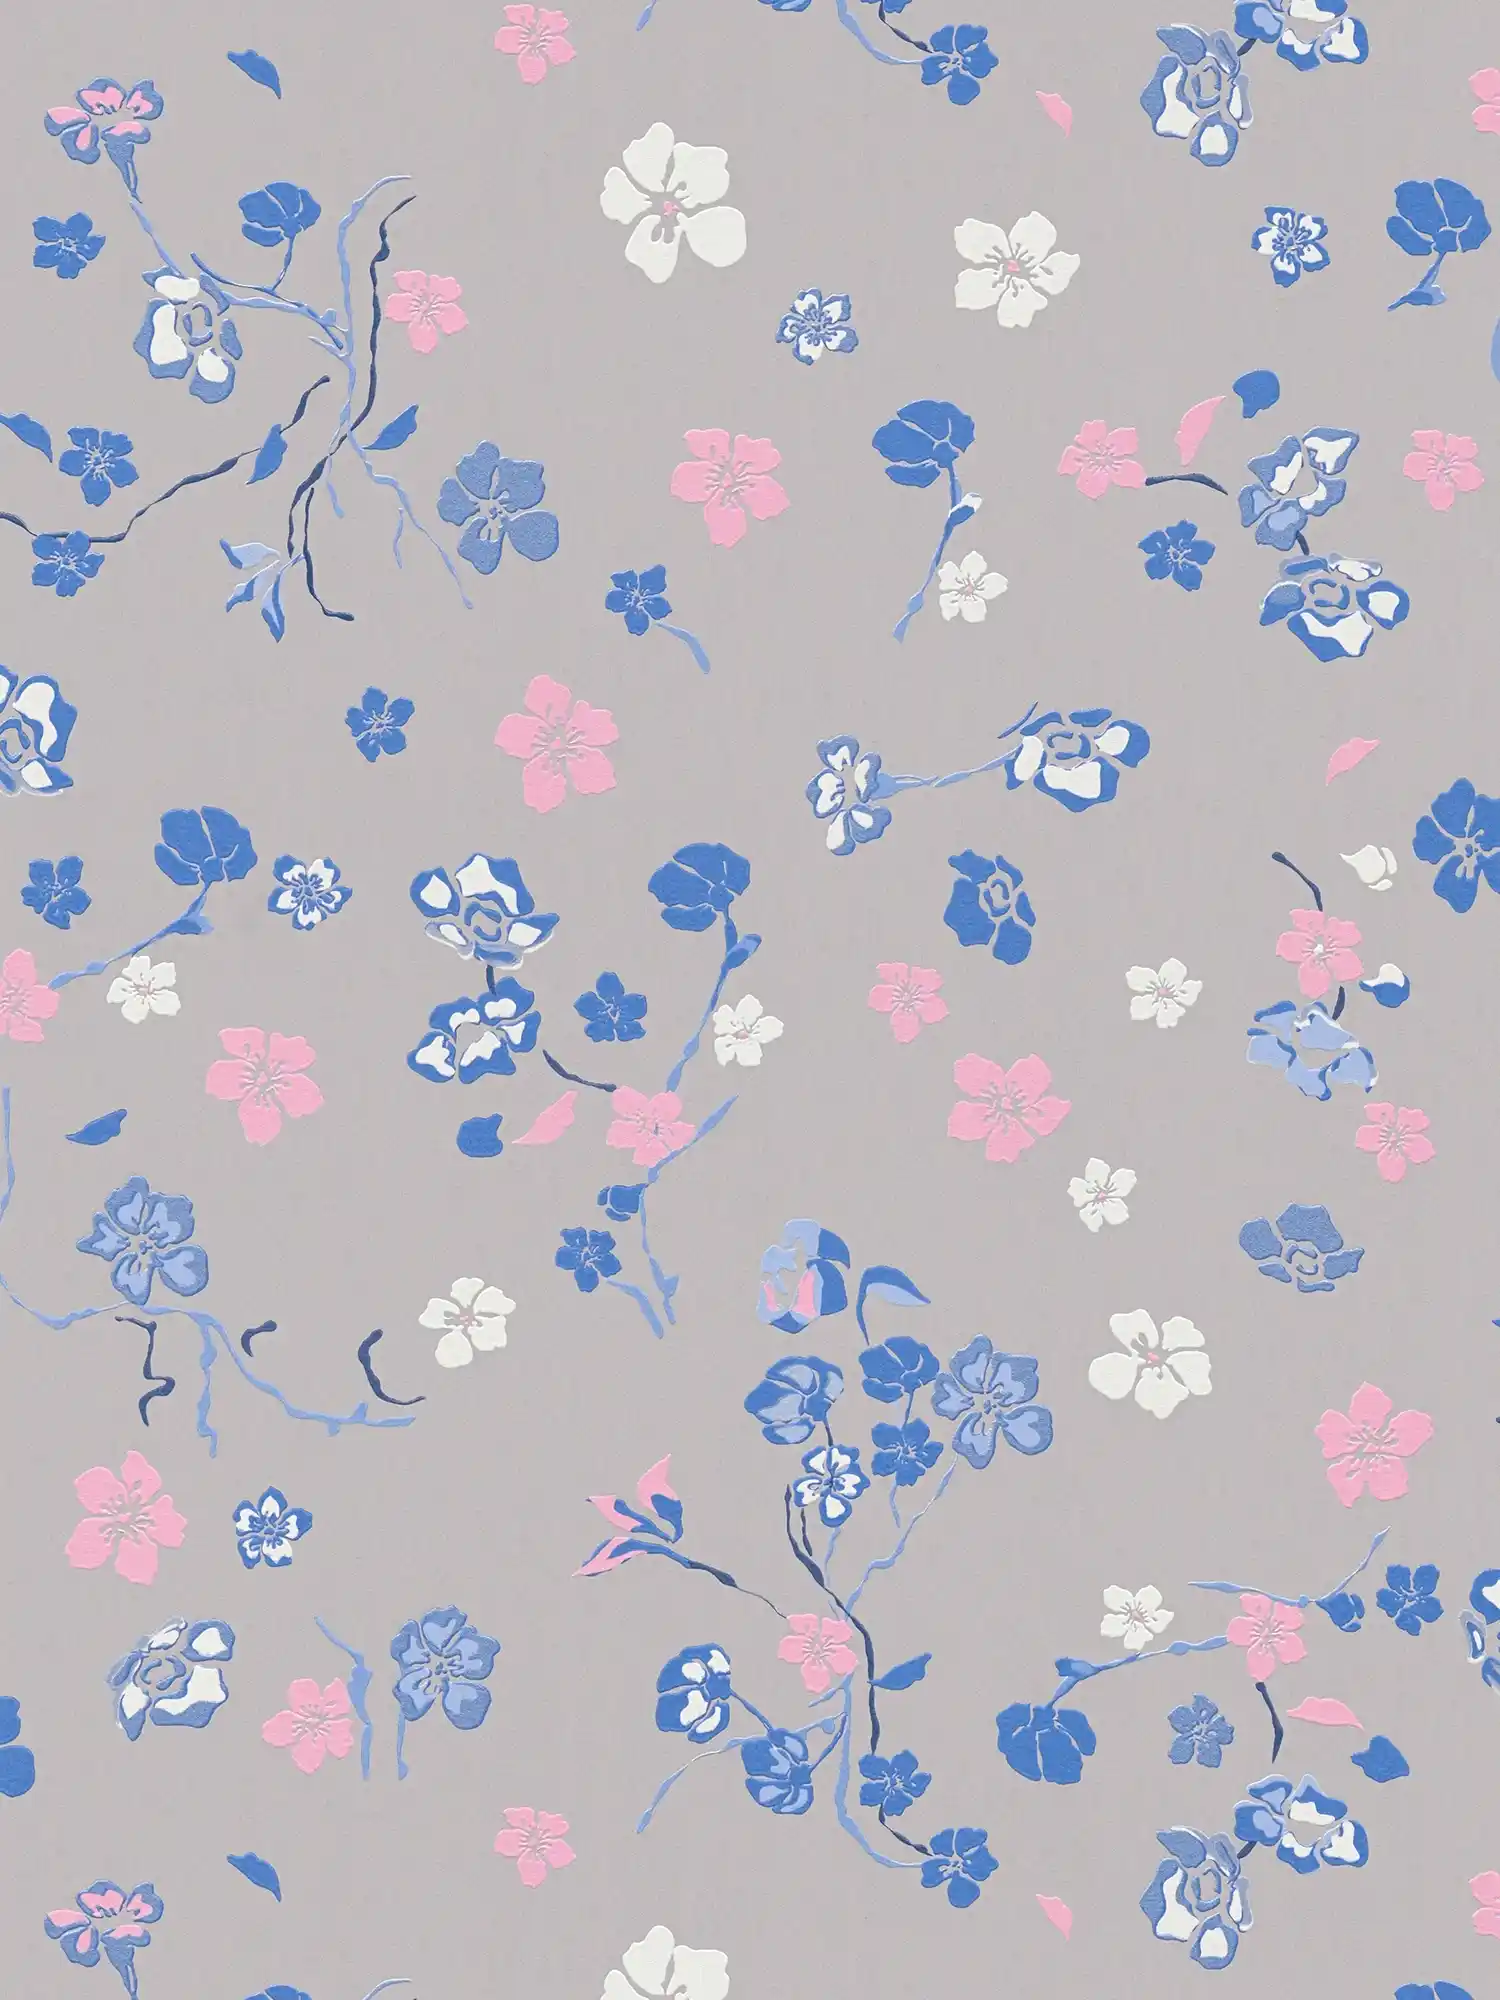 Floral pattern wallpaper with glossy effect - grey, blue, pink
